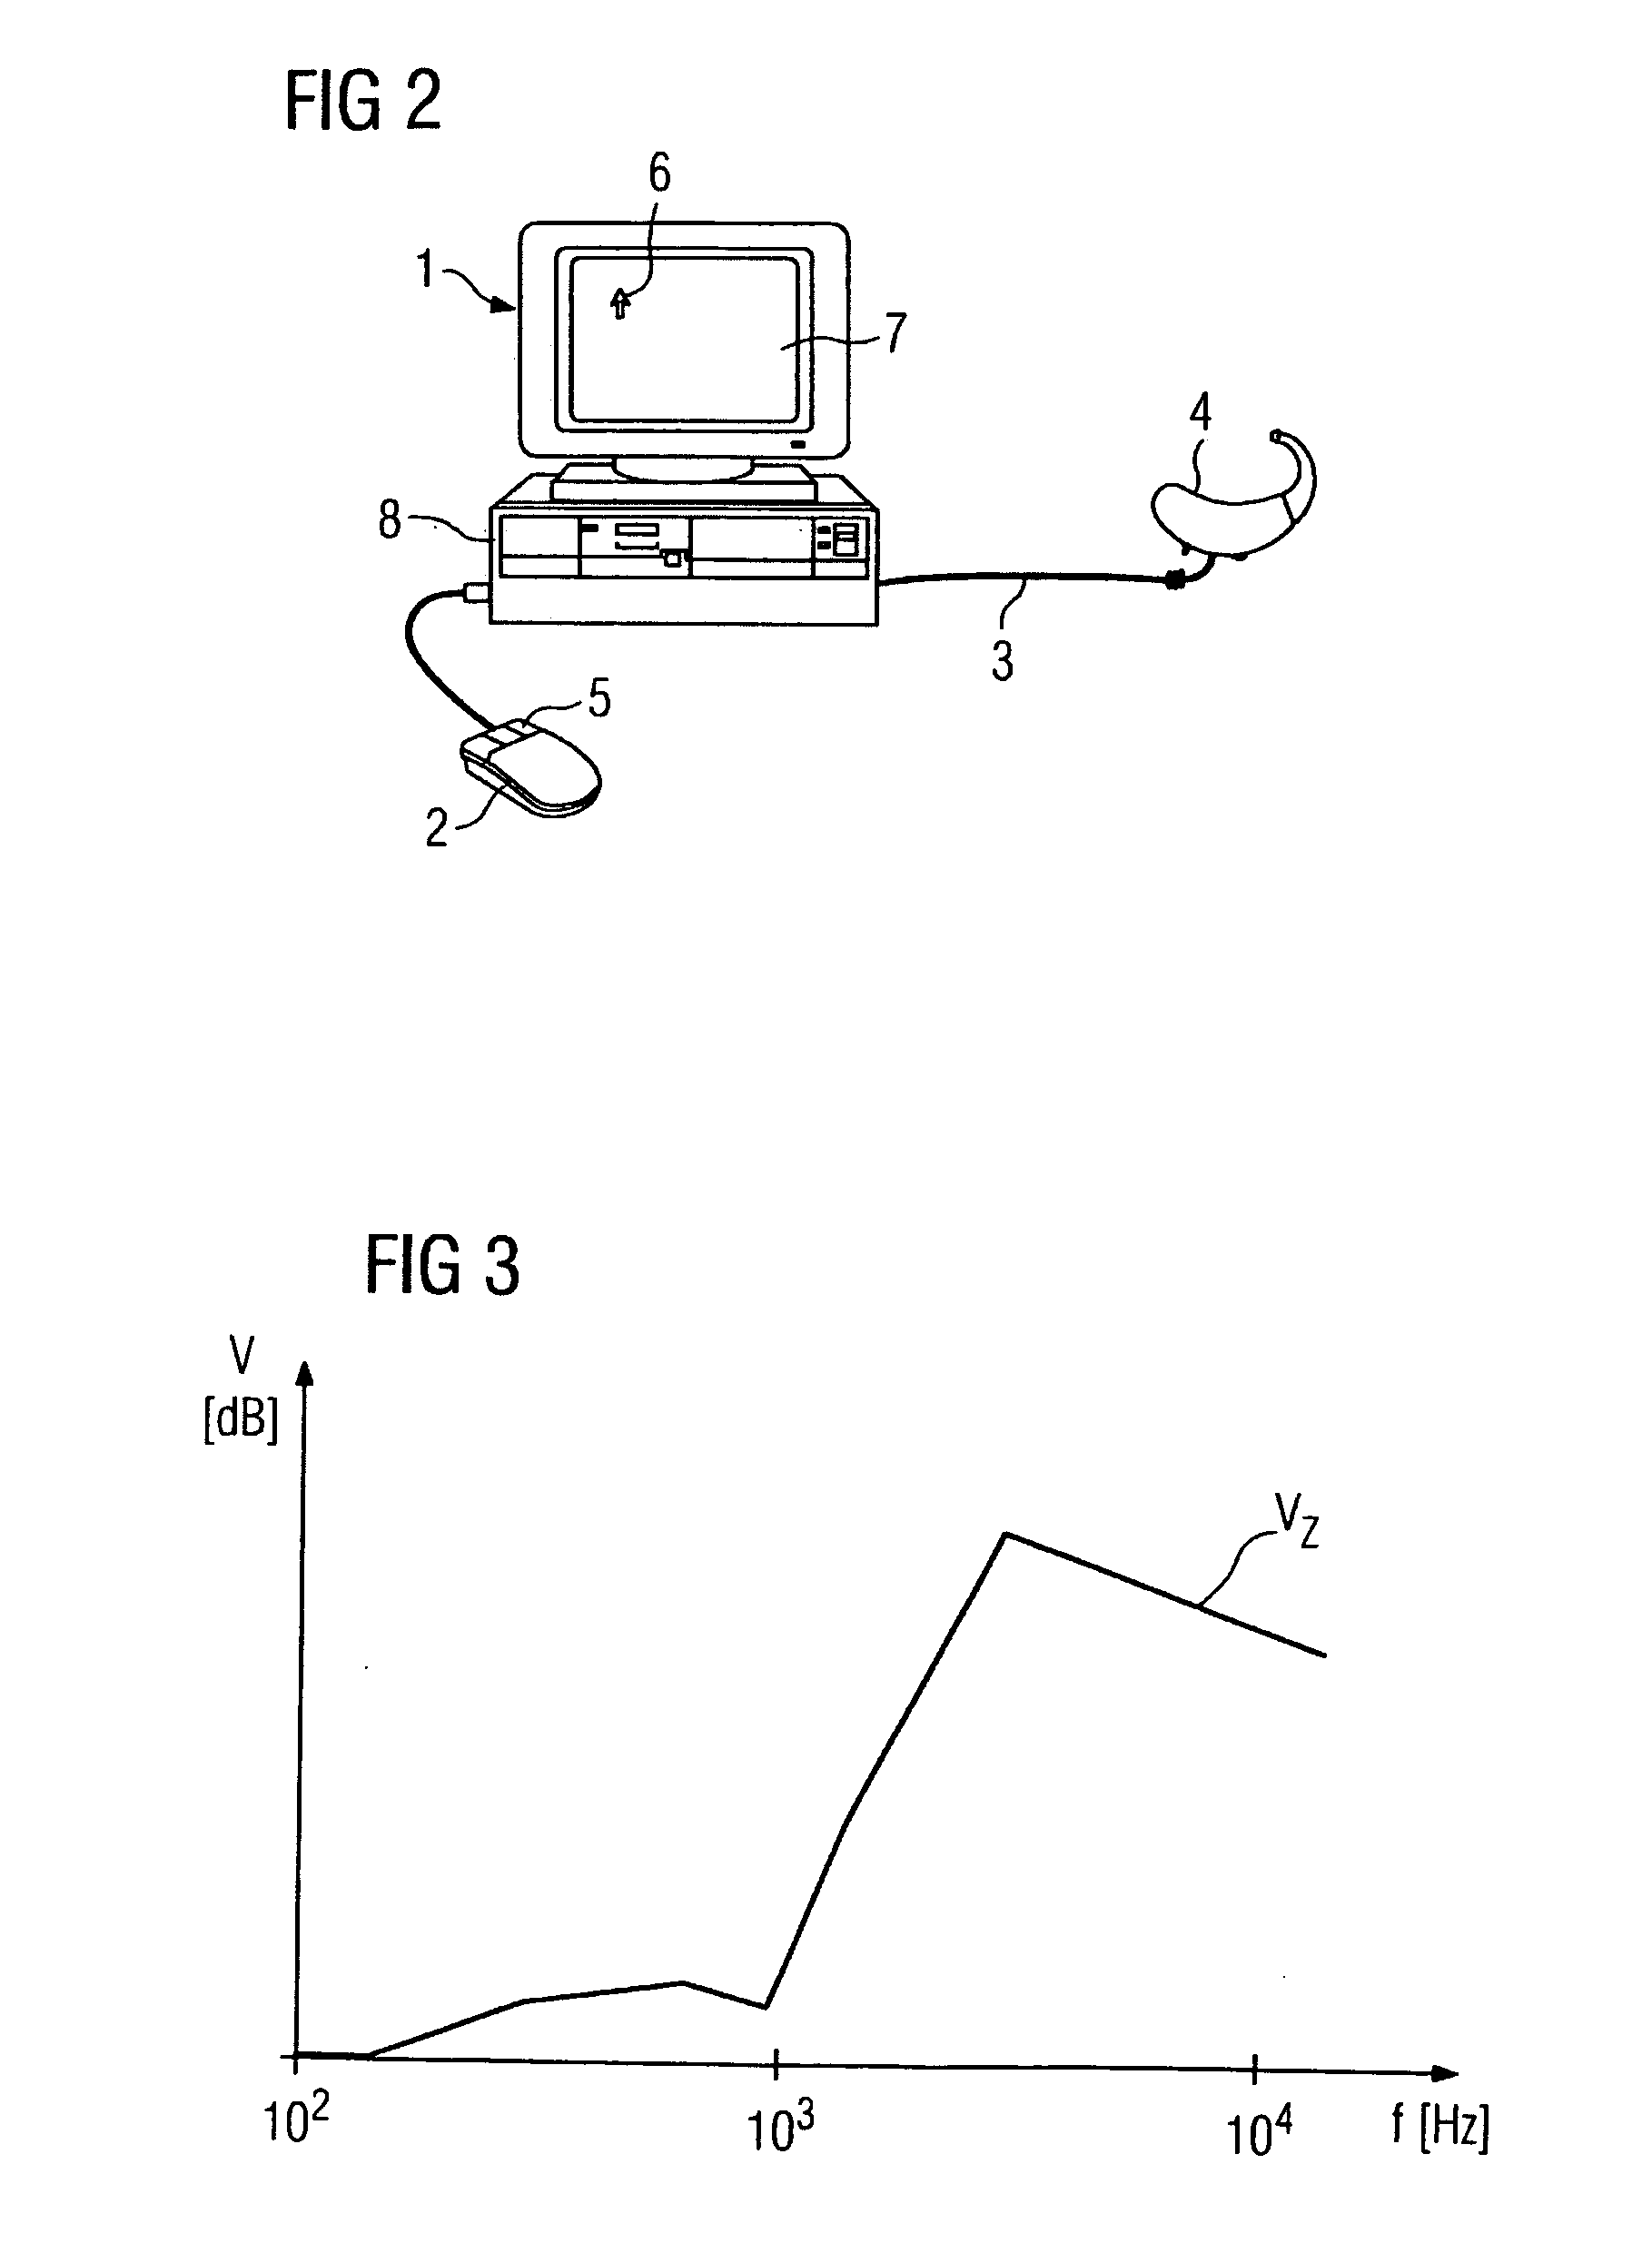 Automatic gain adjustment for a hearing aid device